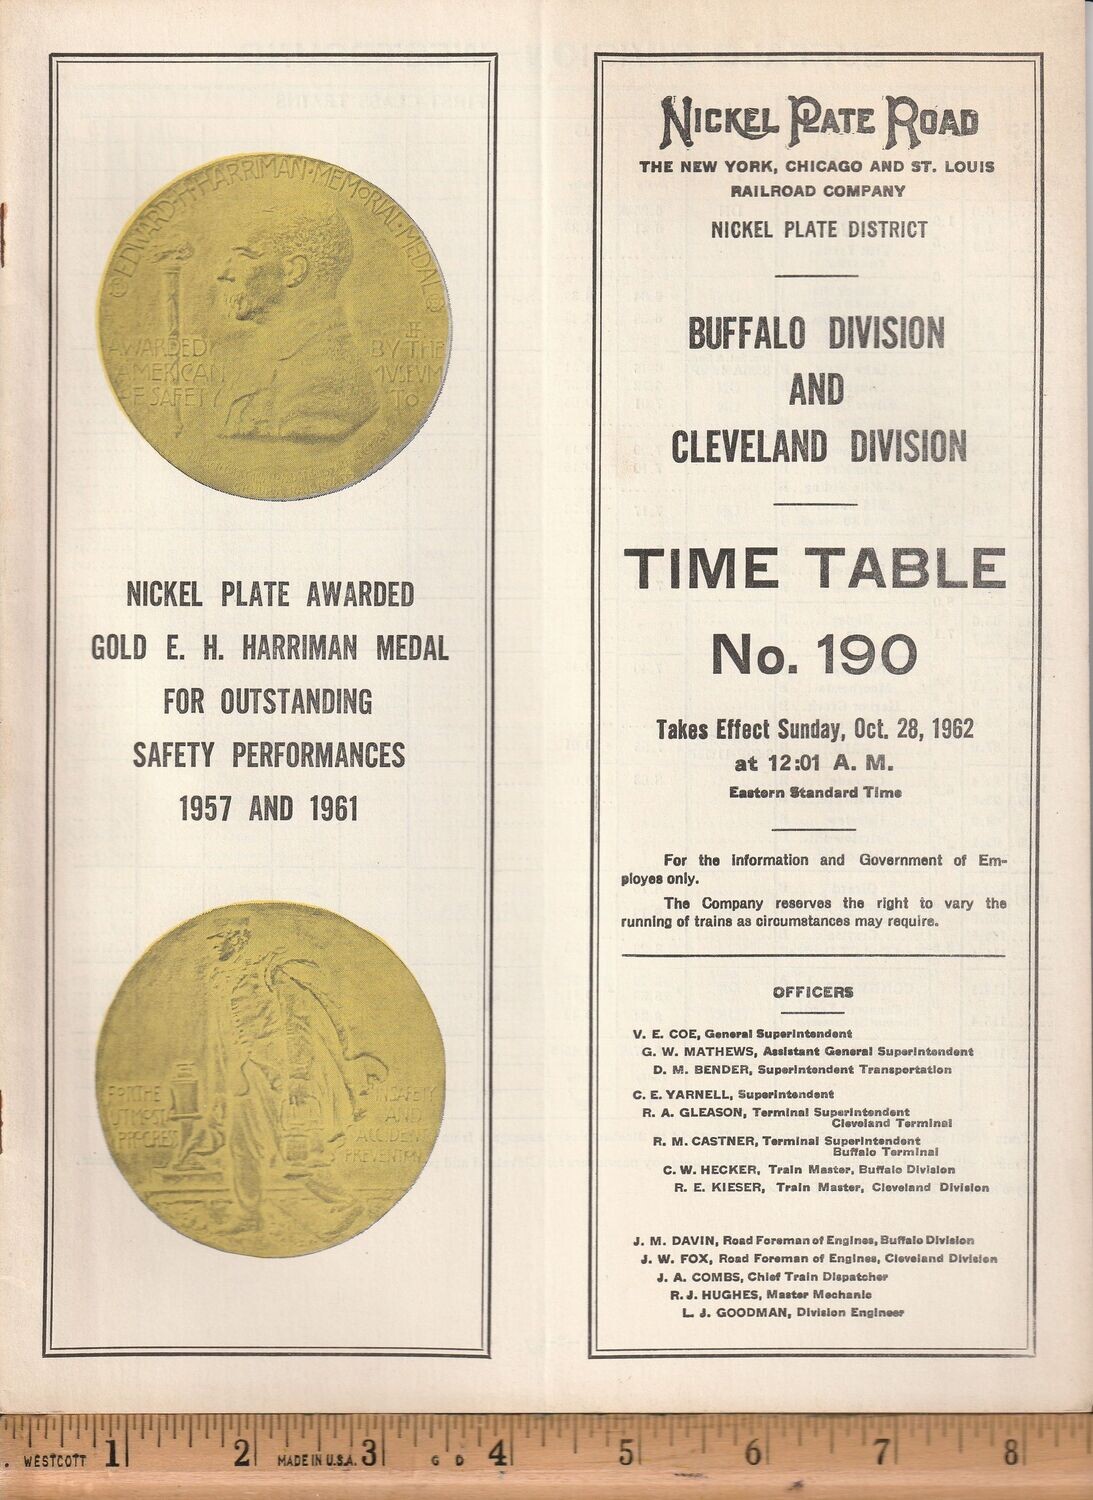 Nickel Plate Road Buffalo and Cleveland Divisions 1962